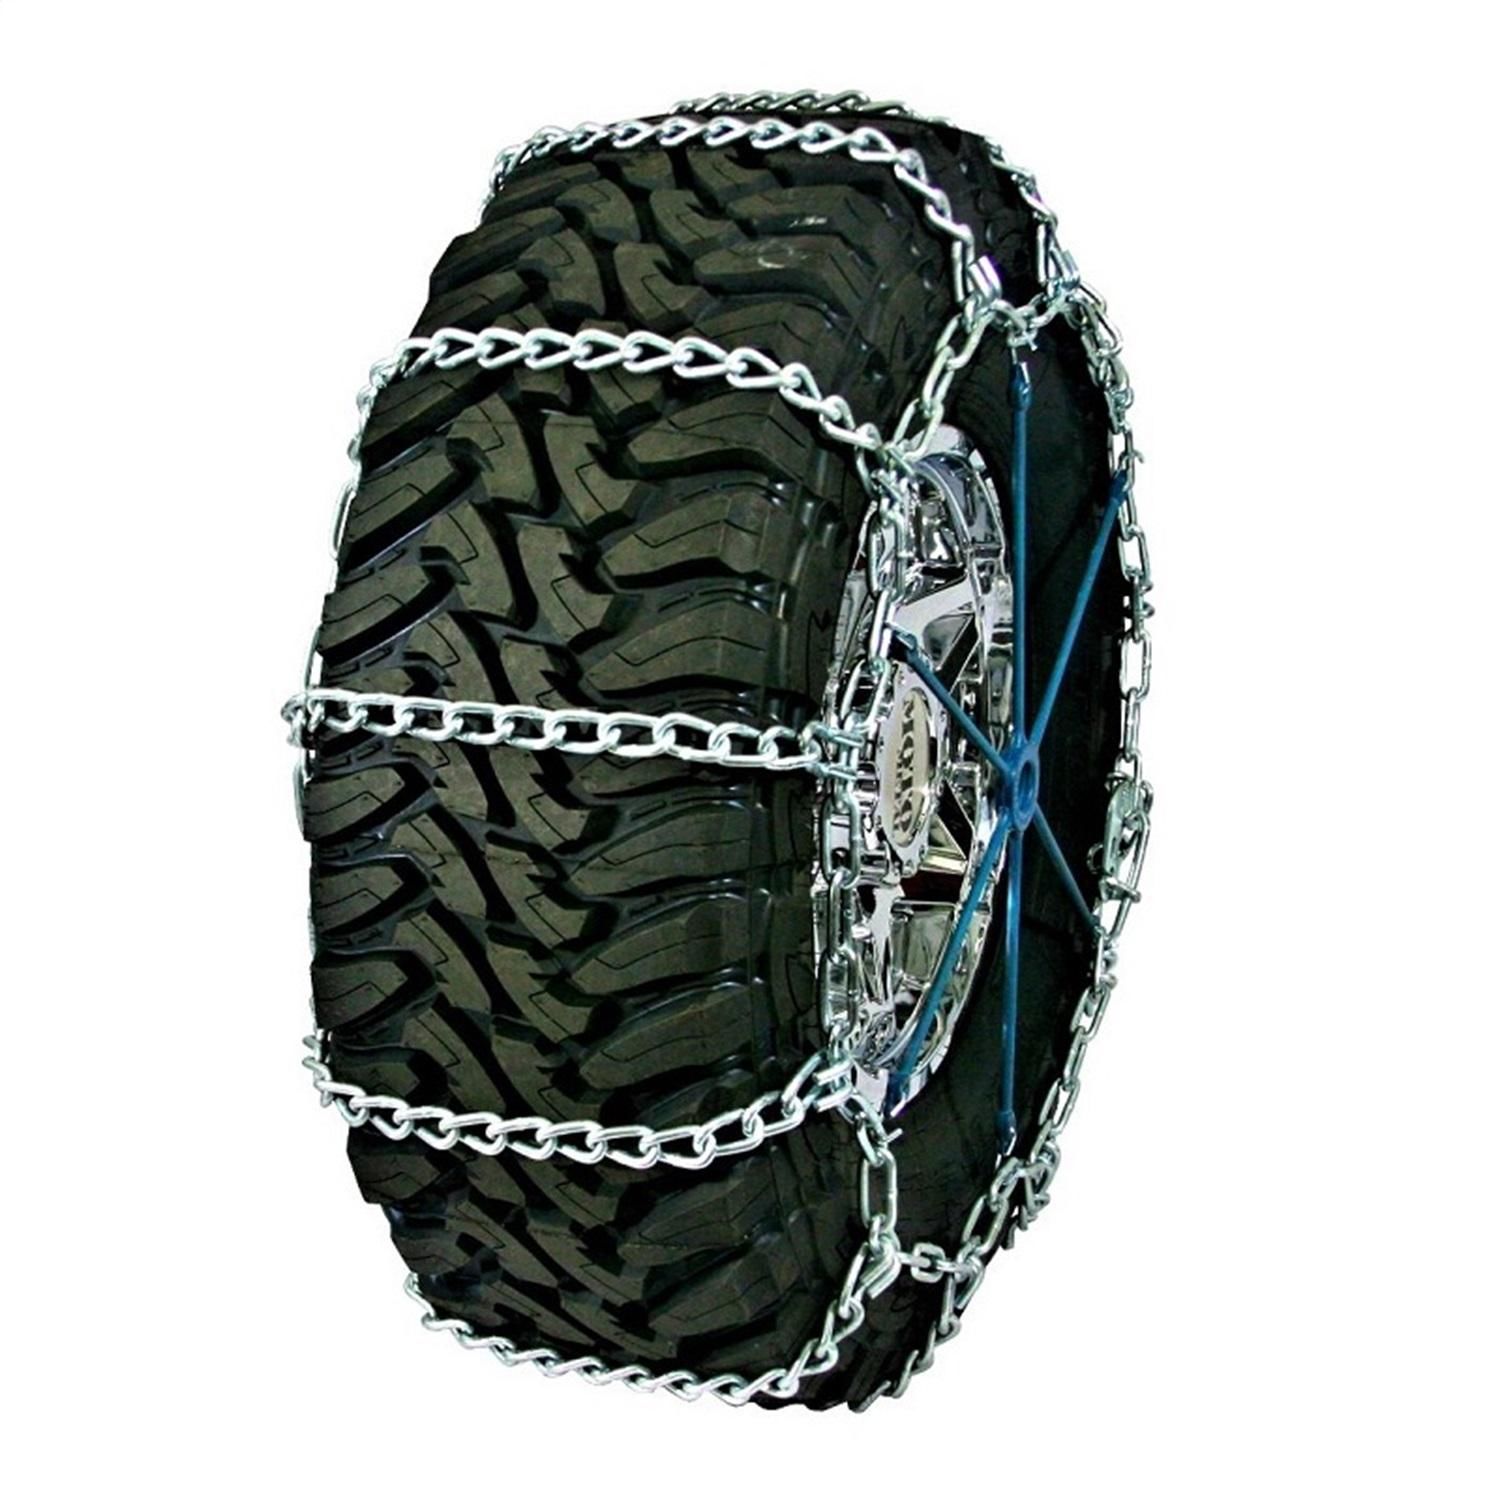 Quality Chain 3229 Road Blazer Wide Base Truck Tire Snow Chains